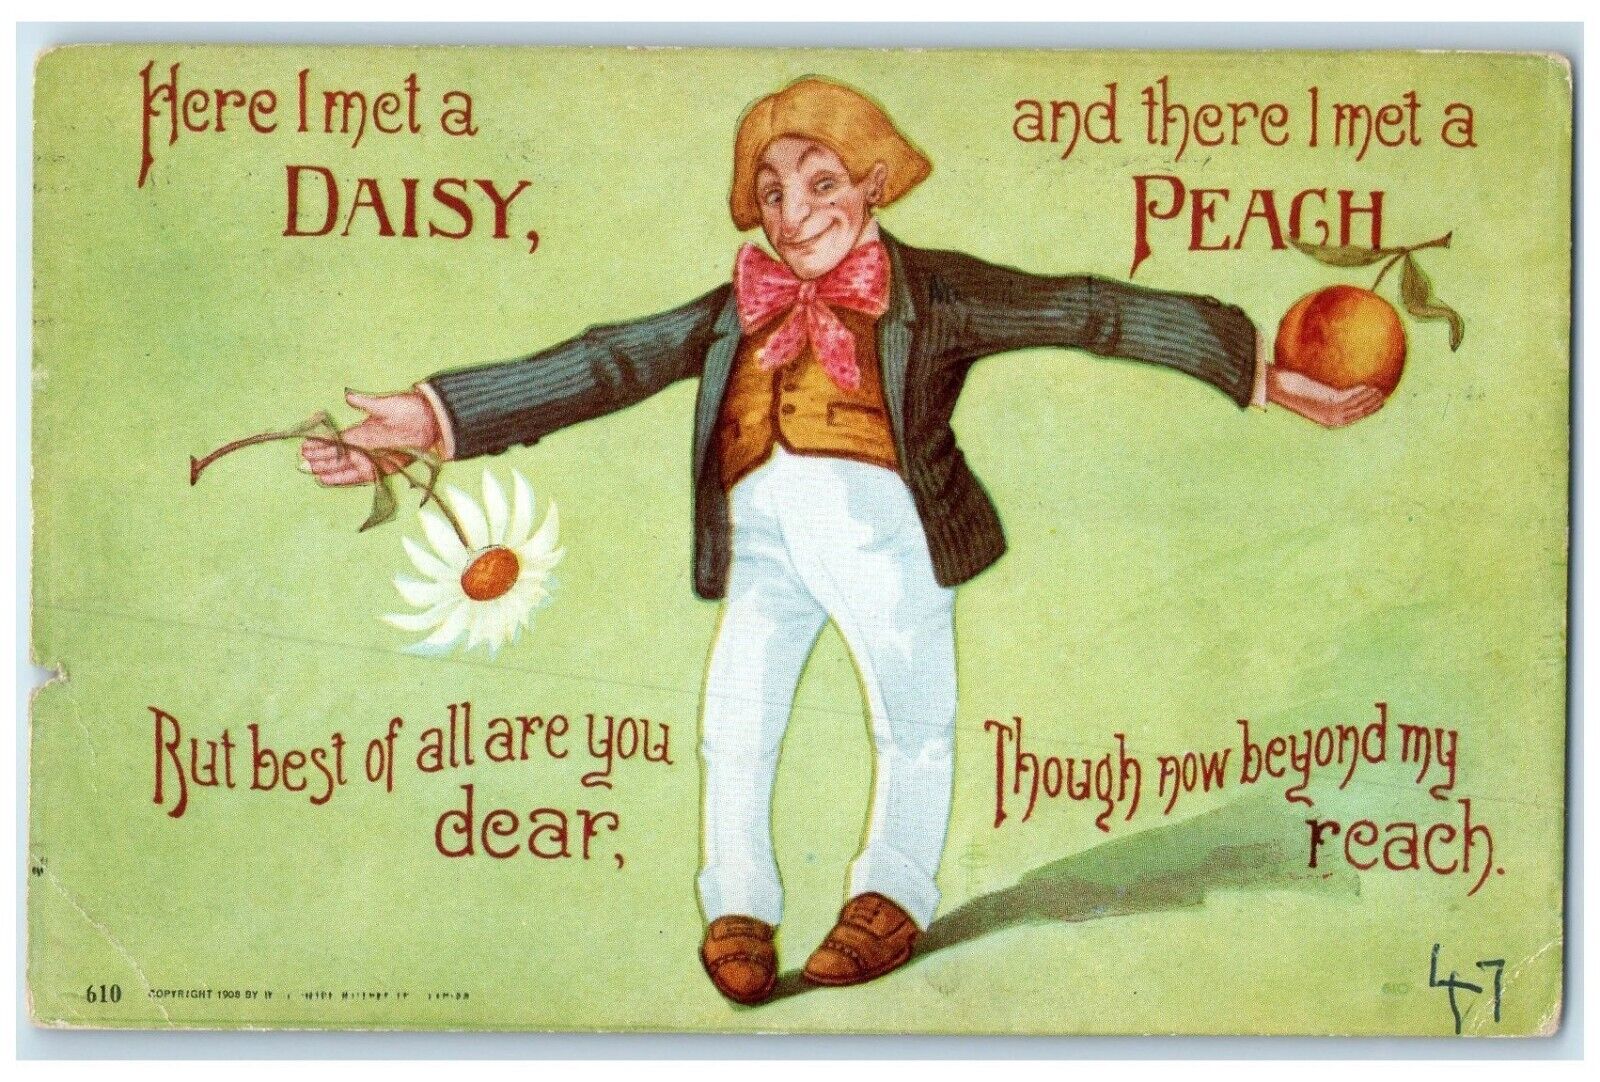 1910 Man With Daisy Flowers And Peach Washington DC Posted Antique Postcard